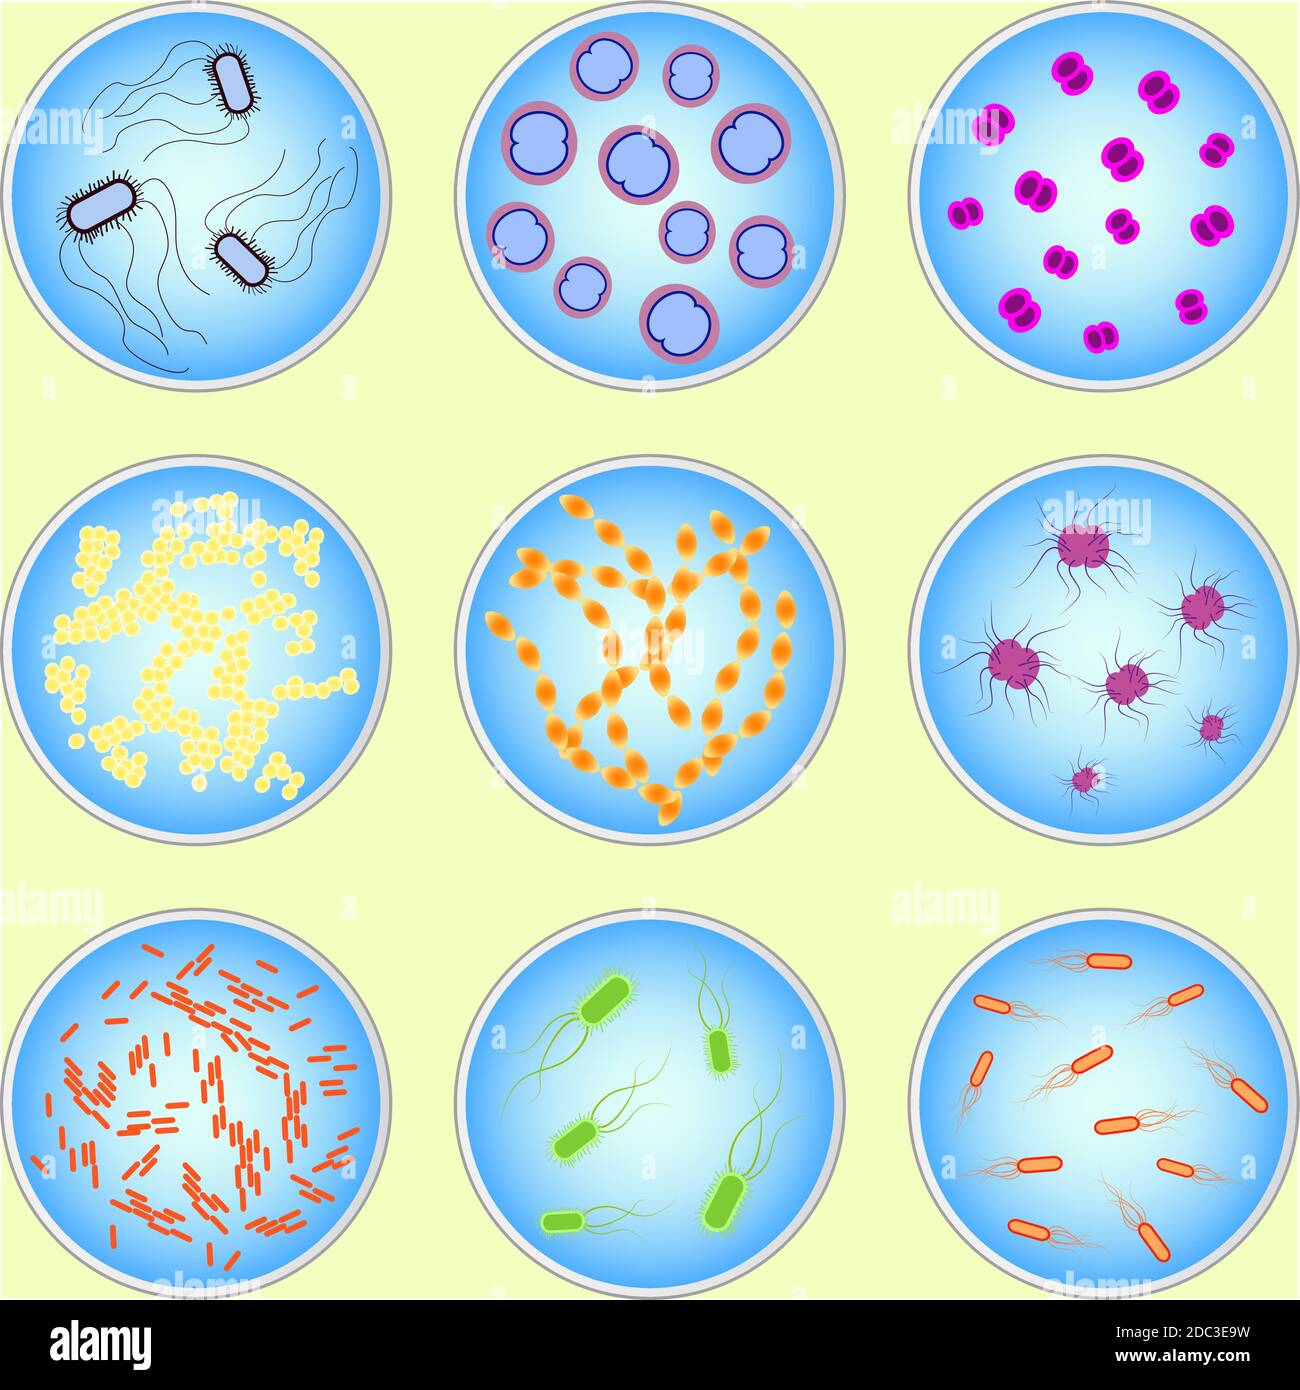 microscopic images of bacteria